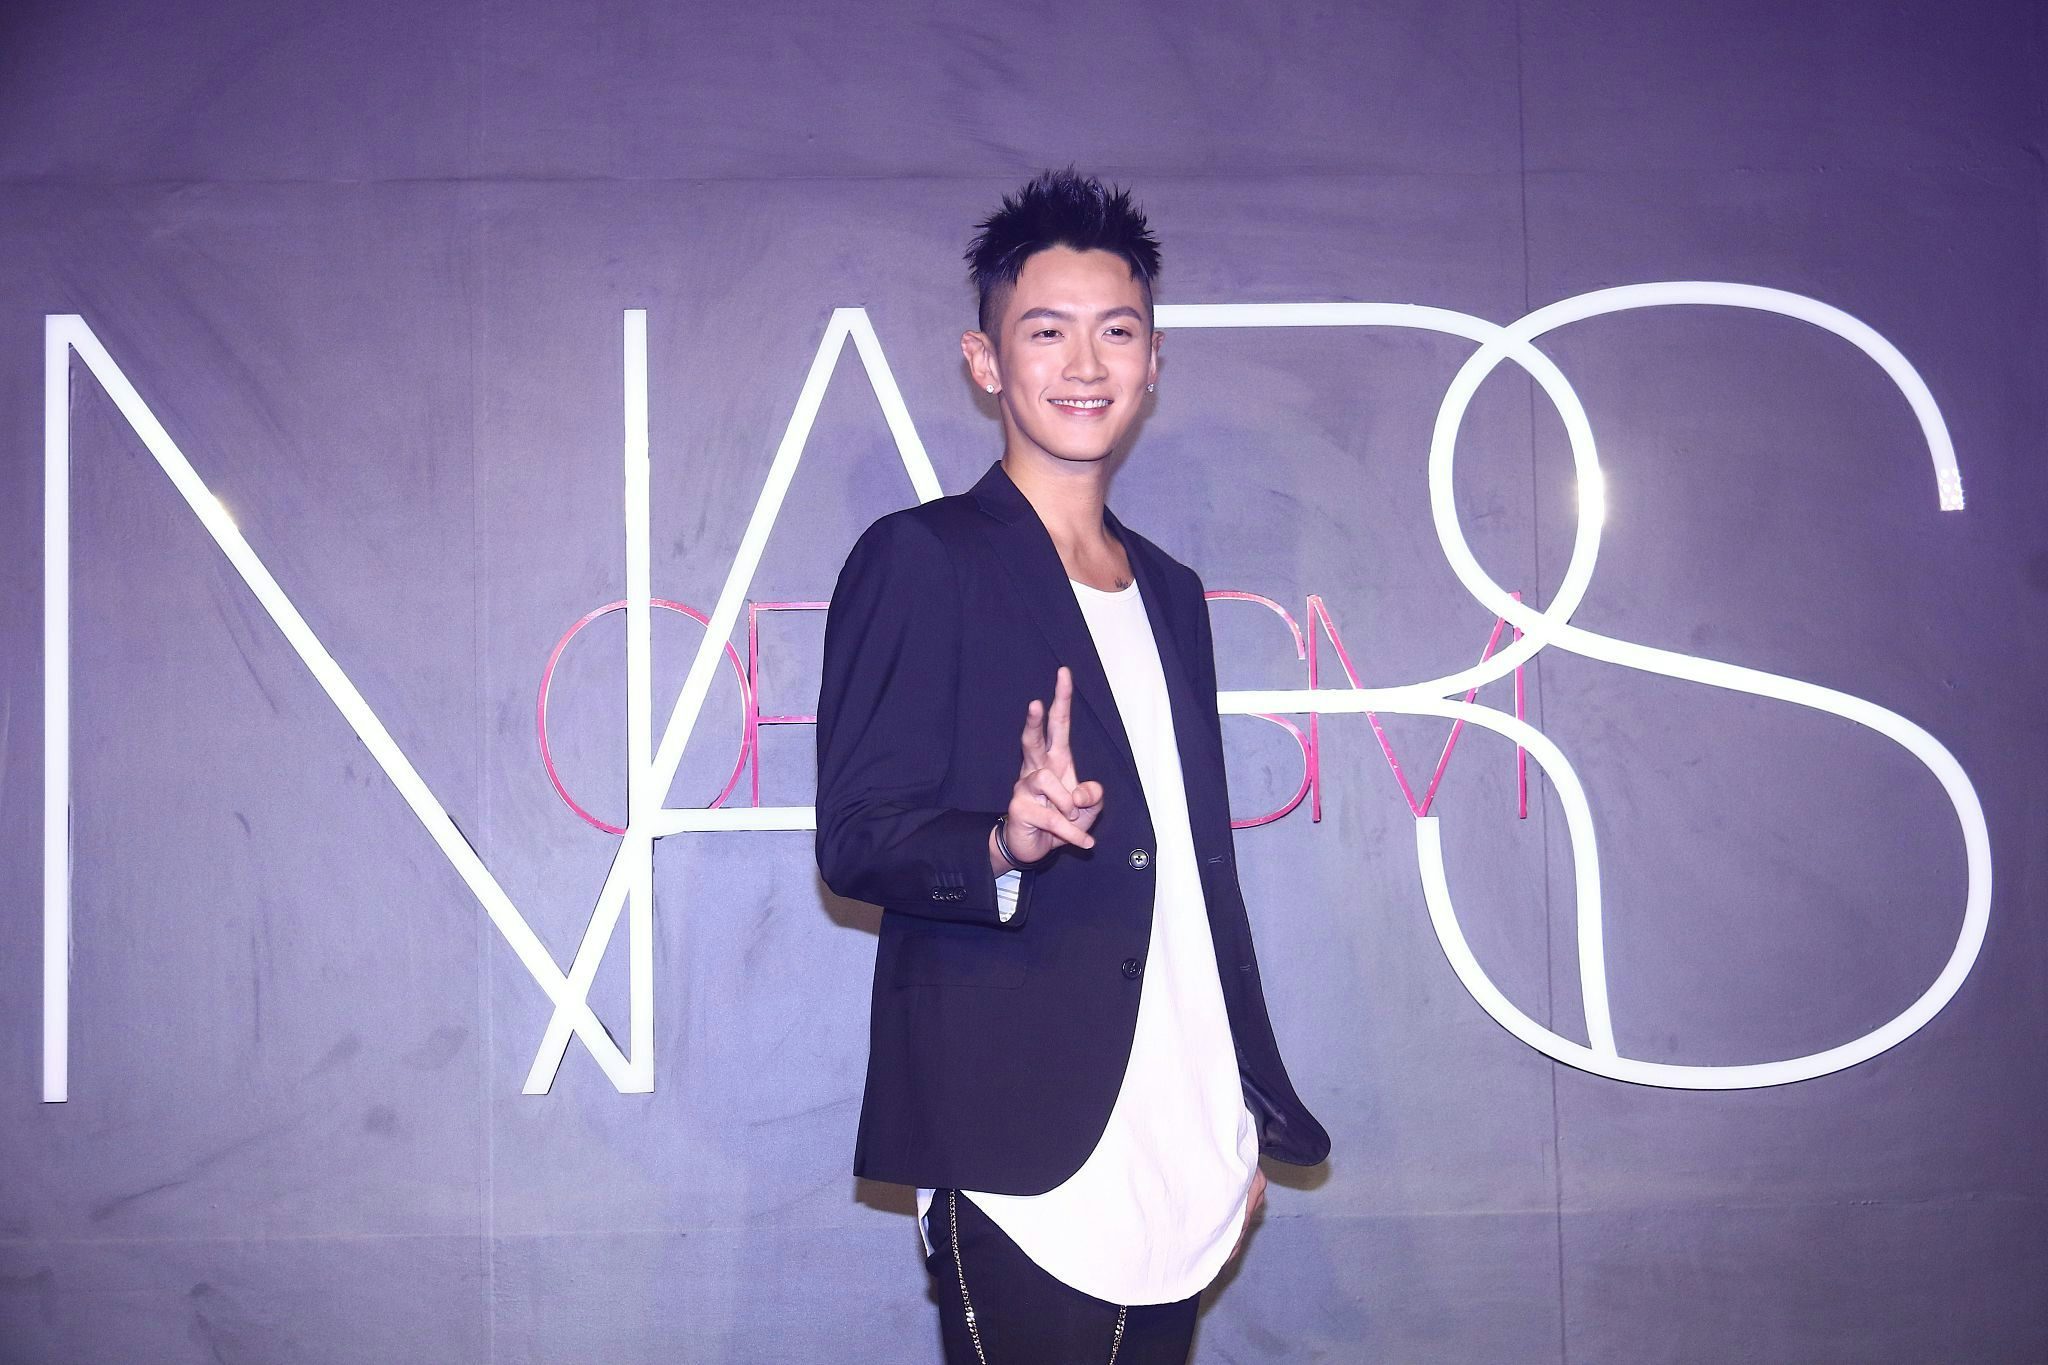 Nars Cosmetics Faces PR Nightmare in China After Hosting Weed-Smoking Celeb